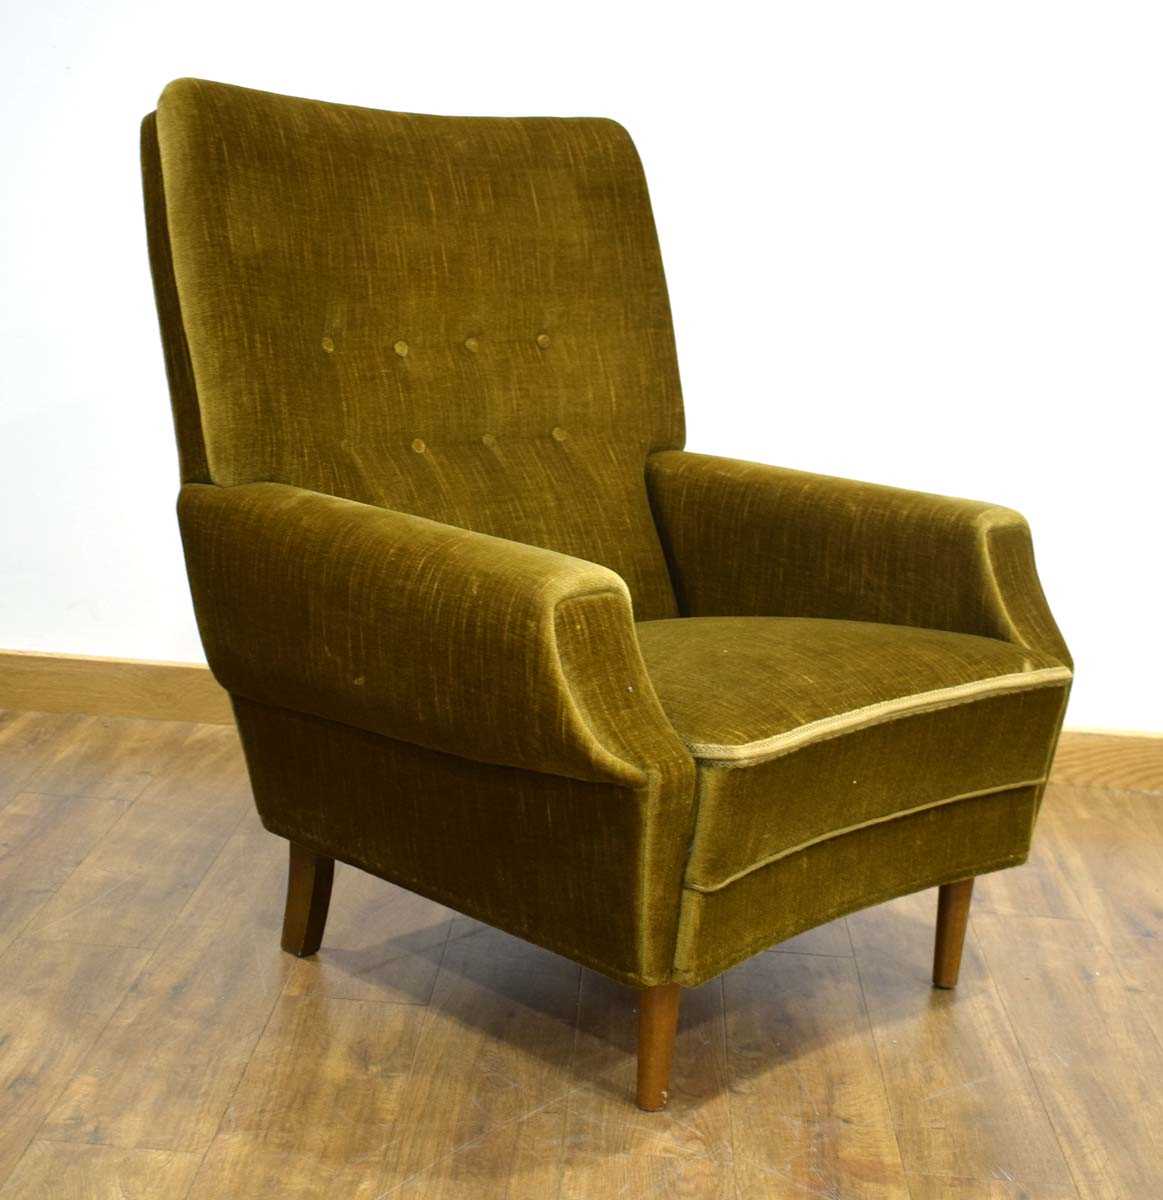 A 1950's highback armchair upholstered in dark green button upholstery *Sold subject to our Soft